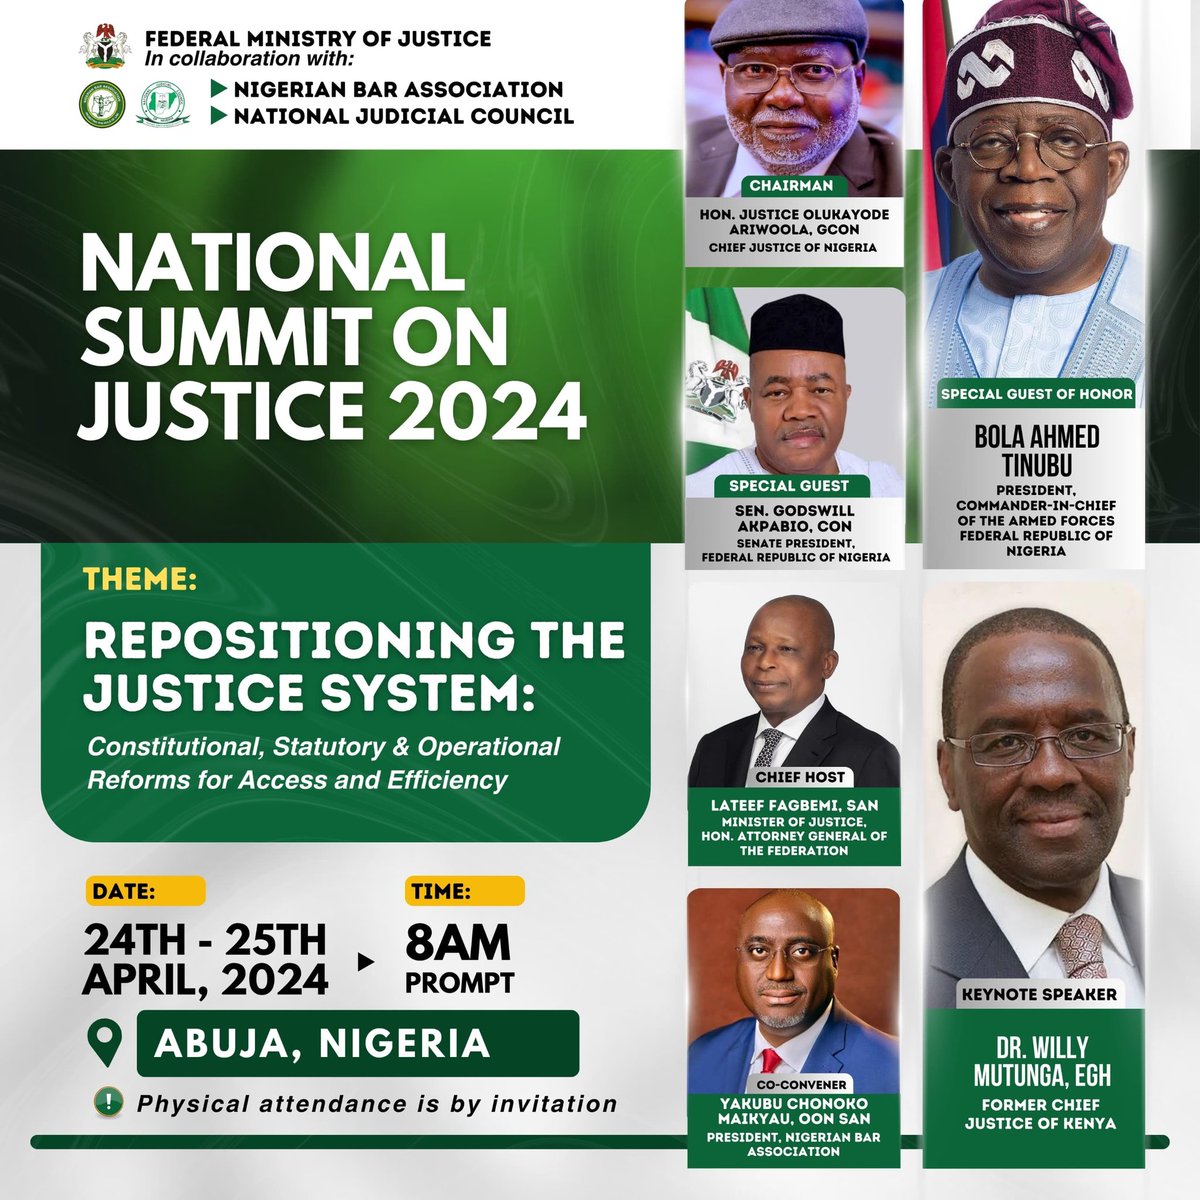 INVITATION TO ATTEND THE NATIONAL SUMMIT ON JUSTICE 2024 Distinguished Colleague, This is to inform you that the National Summit on Justice 2024 shall hold on 24th to 25th April 2024. The theme for this year’s summit is Repositioning the Justice System: Constitutional,